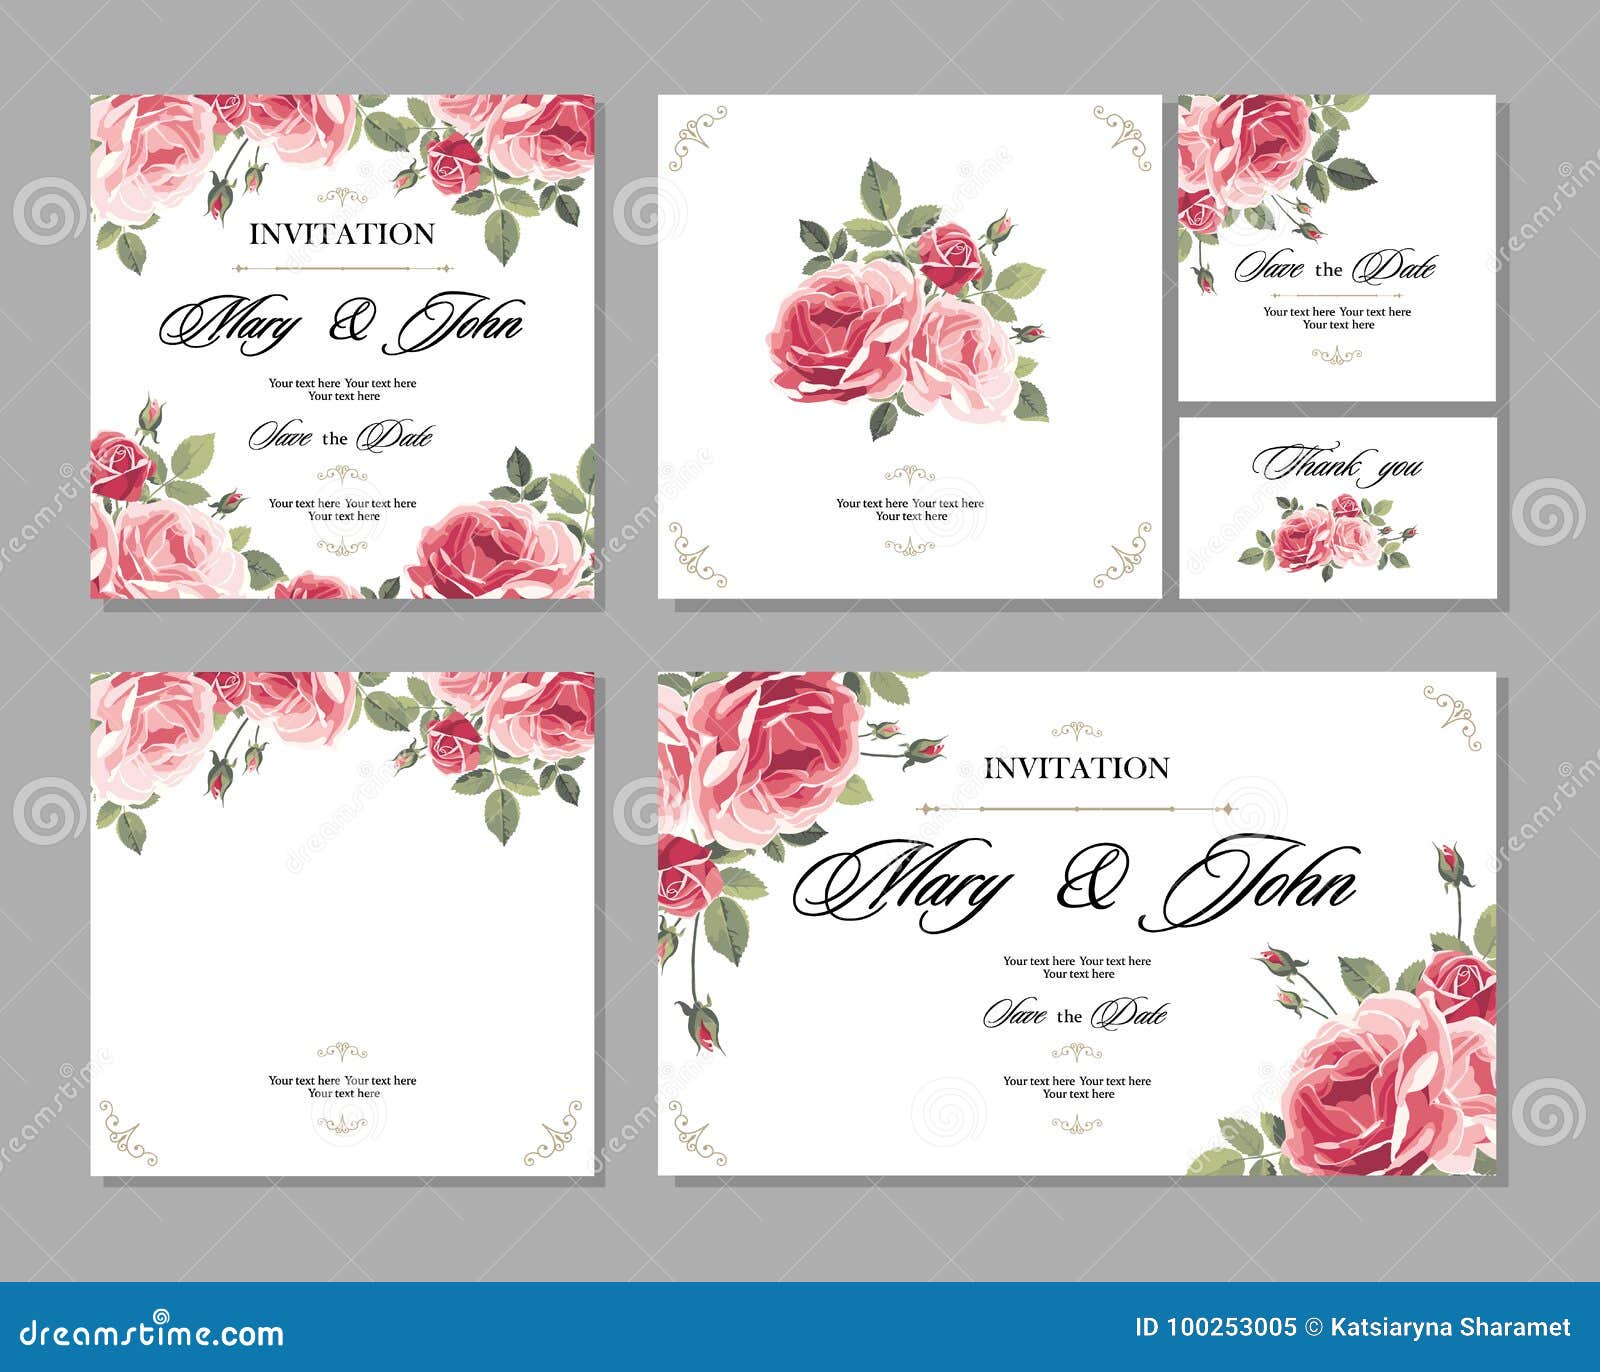 set wedding invitation vintage card with roses and antique decorative s.